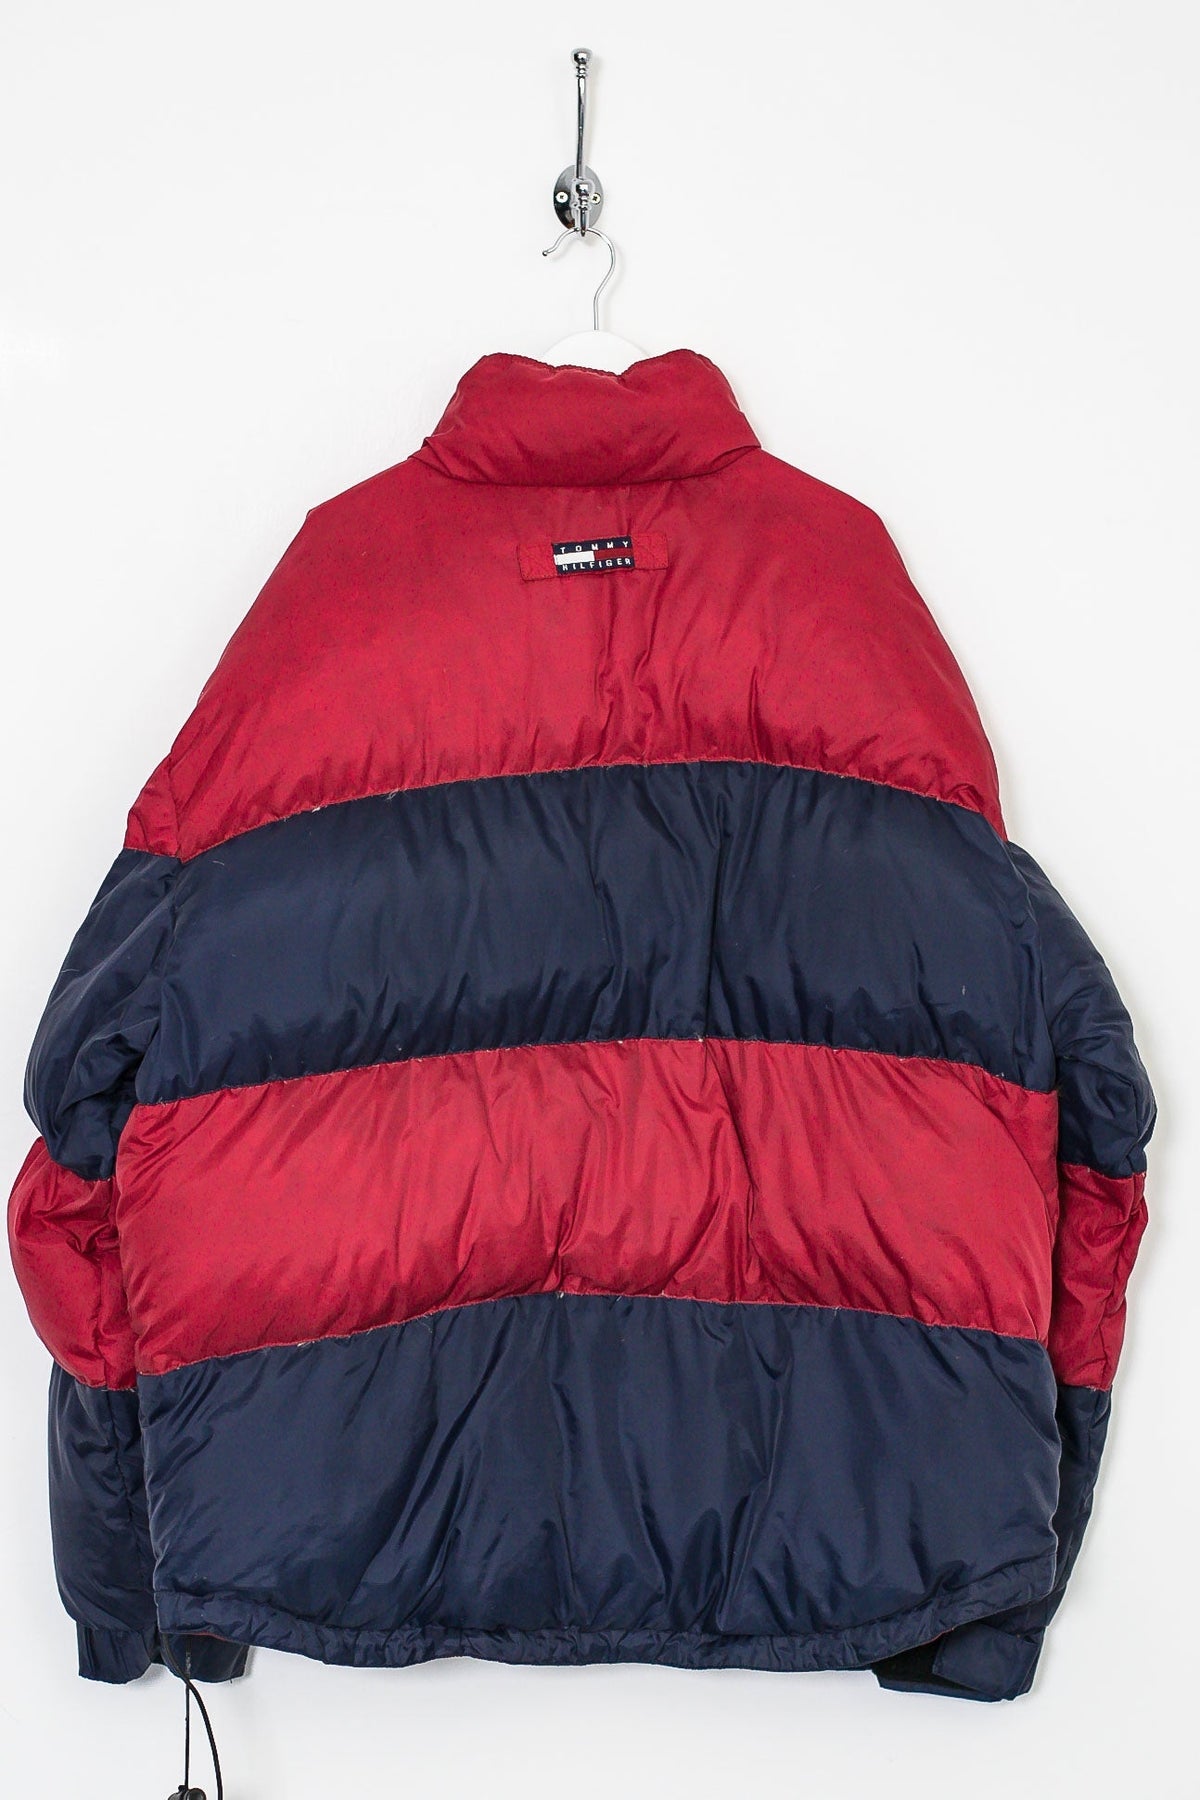 90s Tommy Hilfiger Down filled Puffer Jacket (XL)